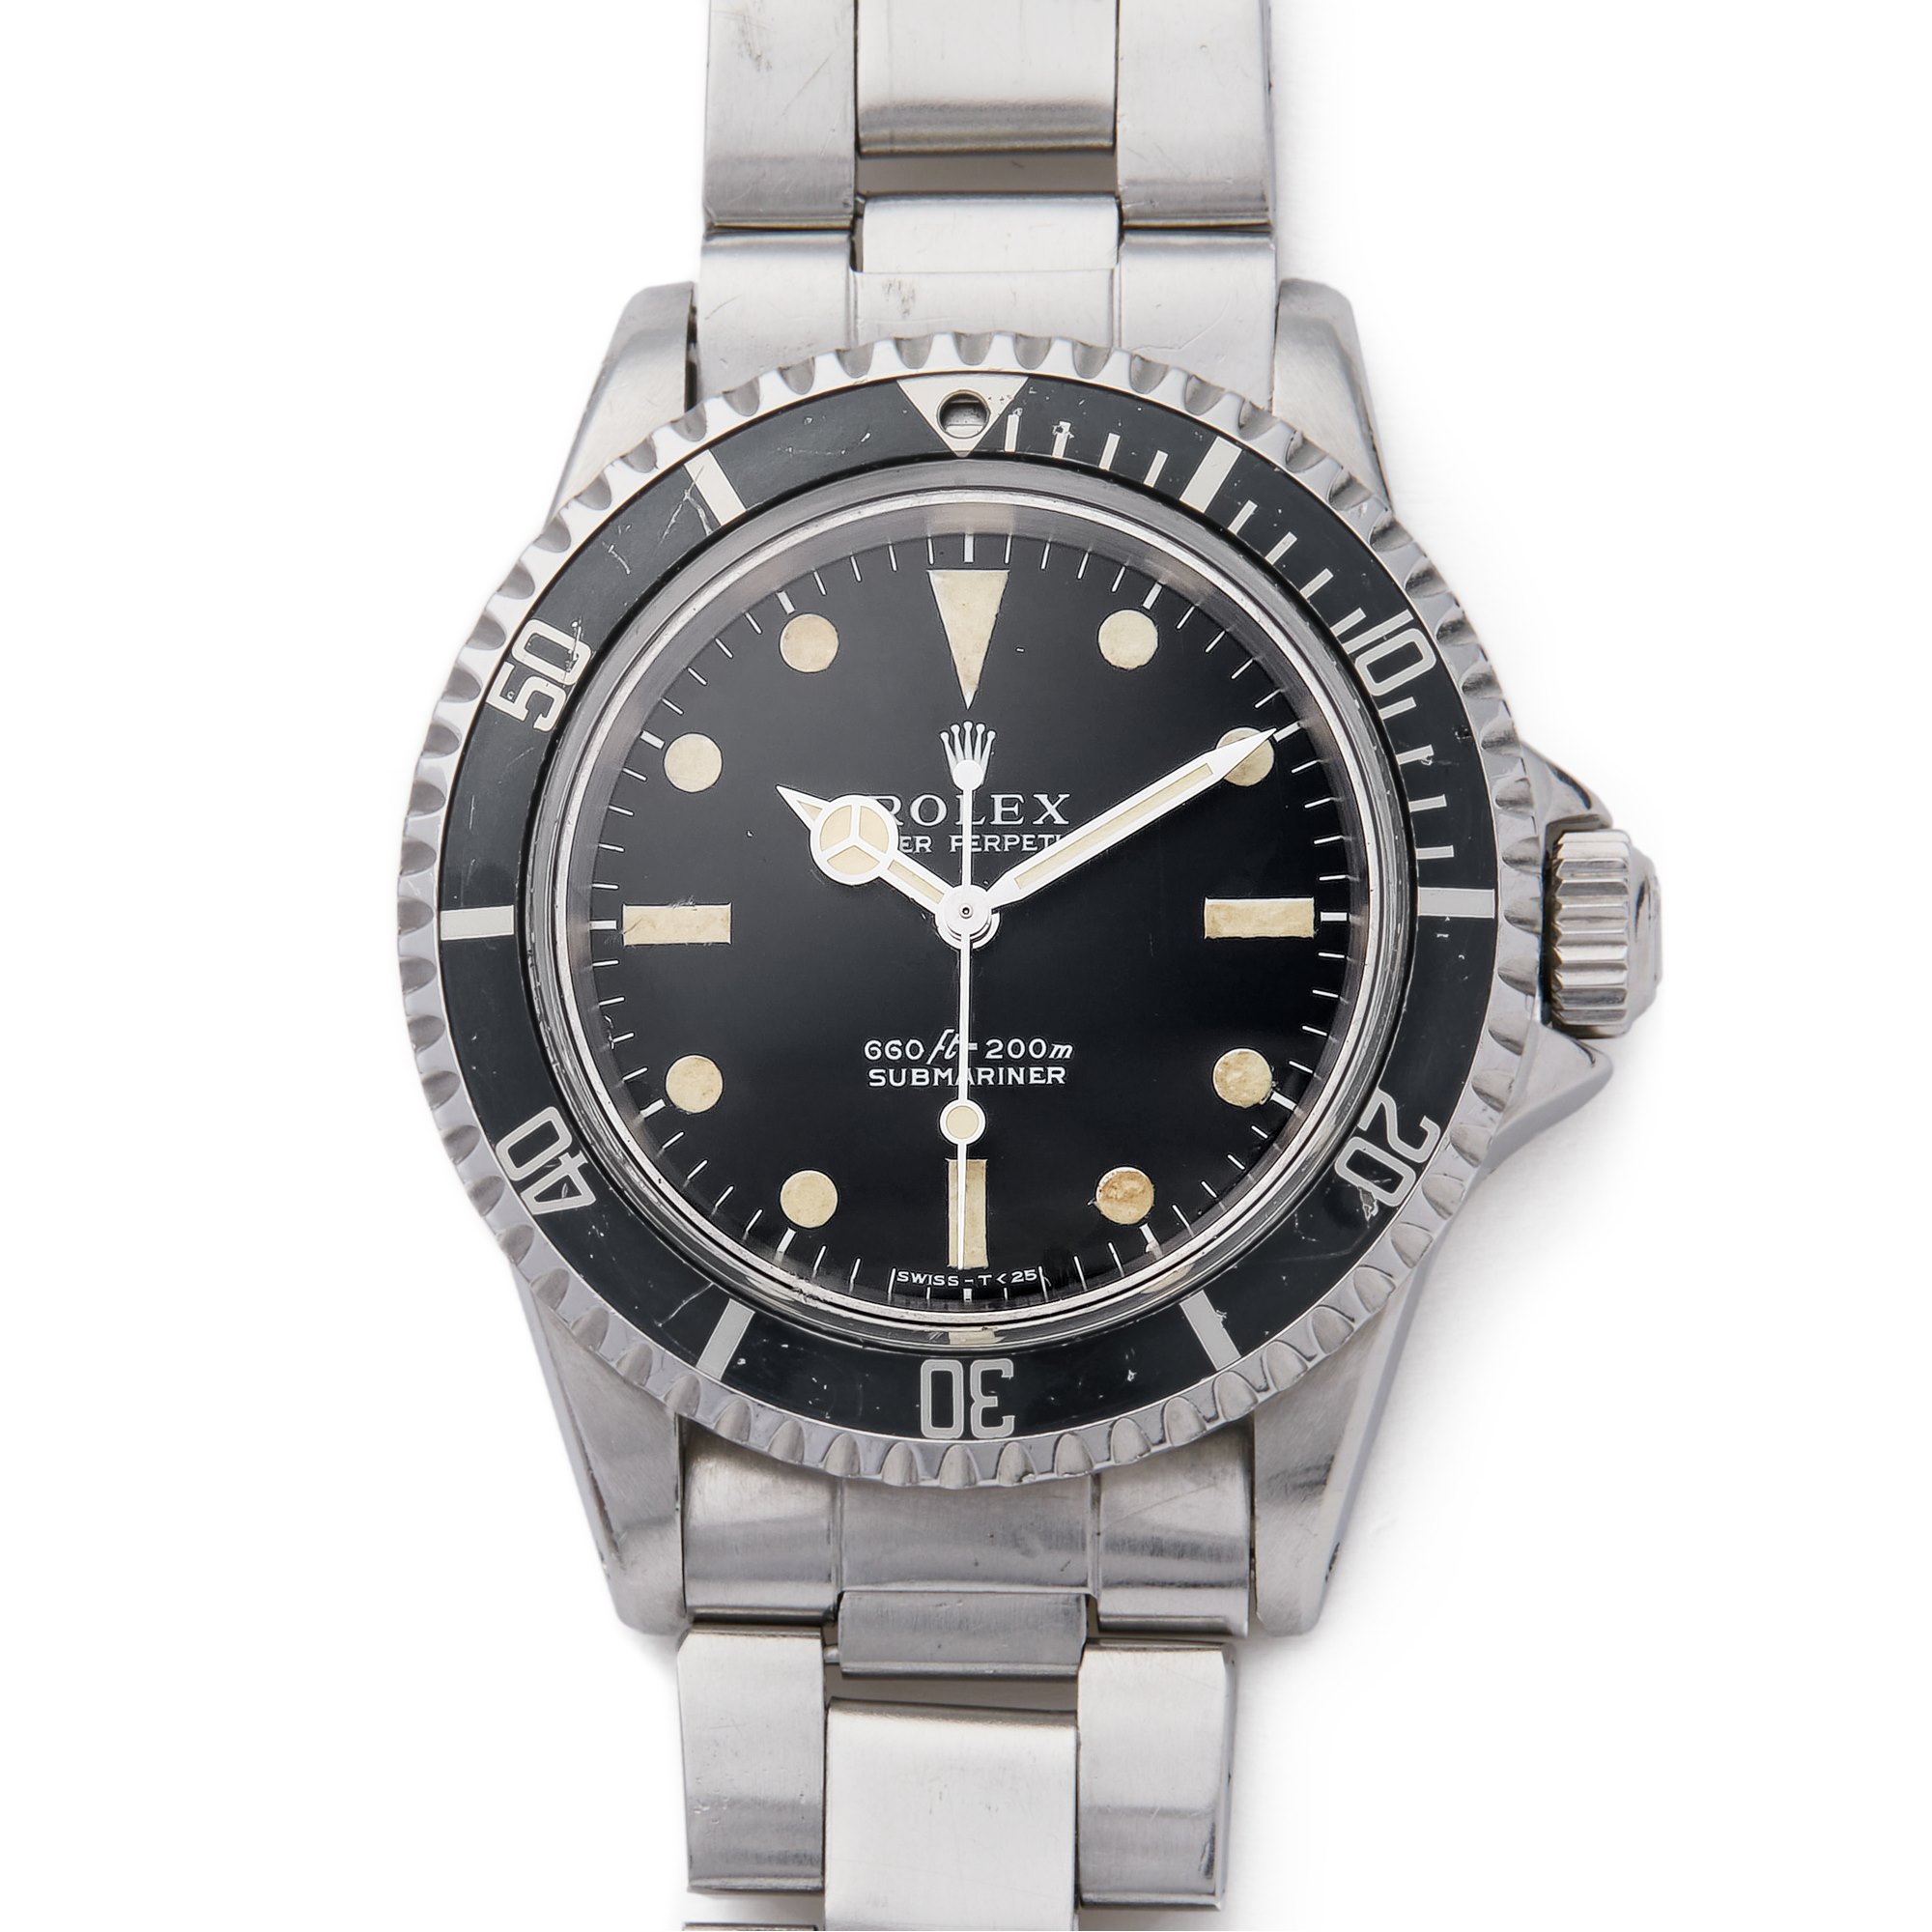 Rolex Submariner Non Date Feet First Roestvrij Staal 5513